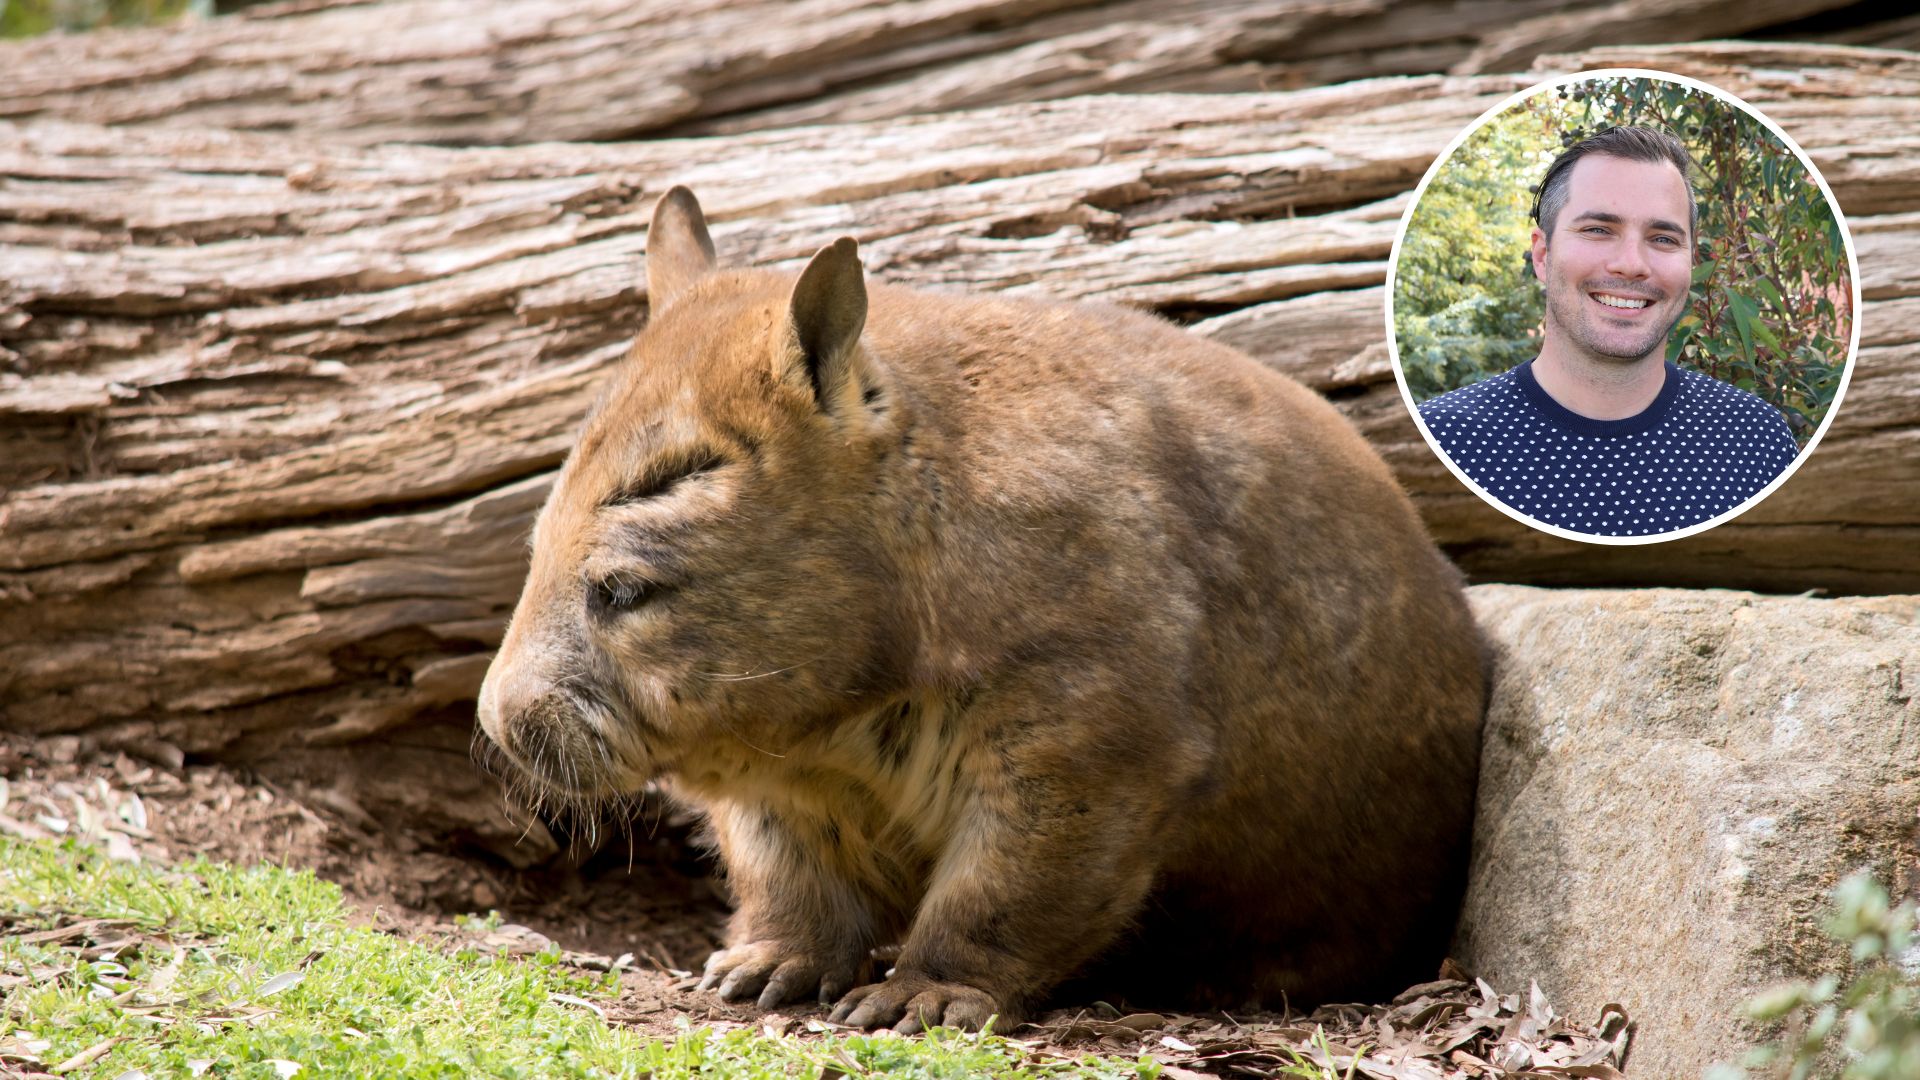 Cameras reveal wombat burrows can be safe havens after fire and waterholes after rain 